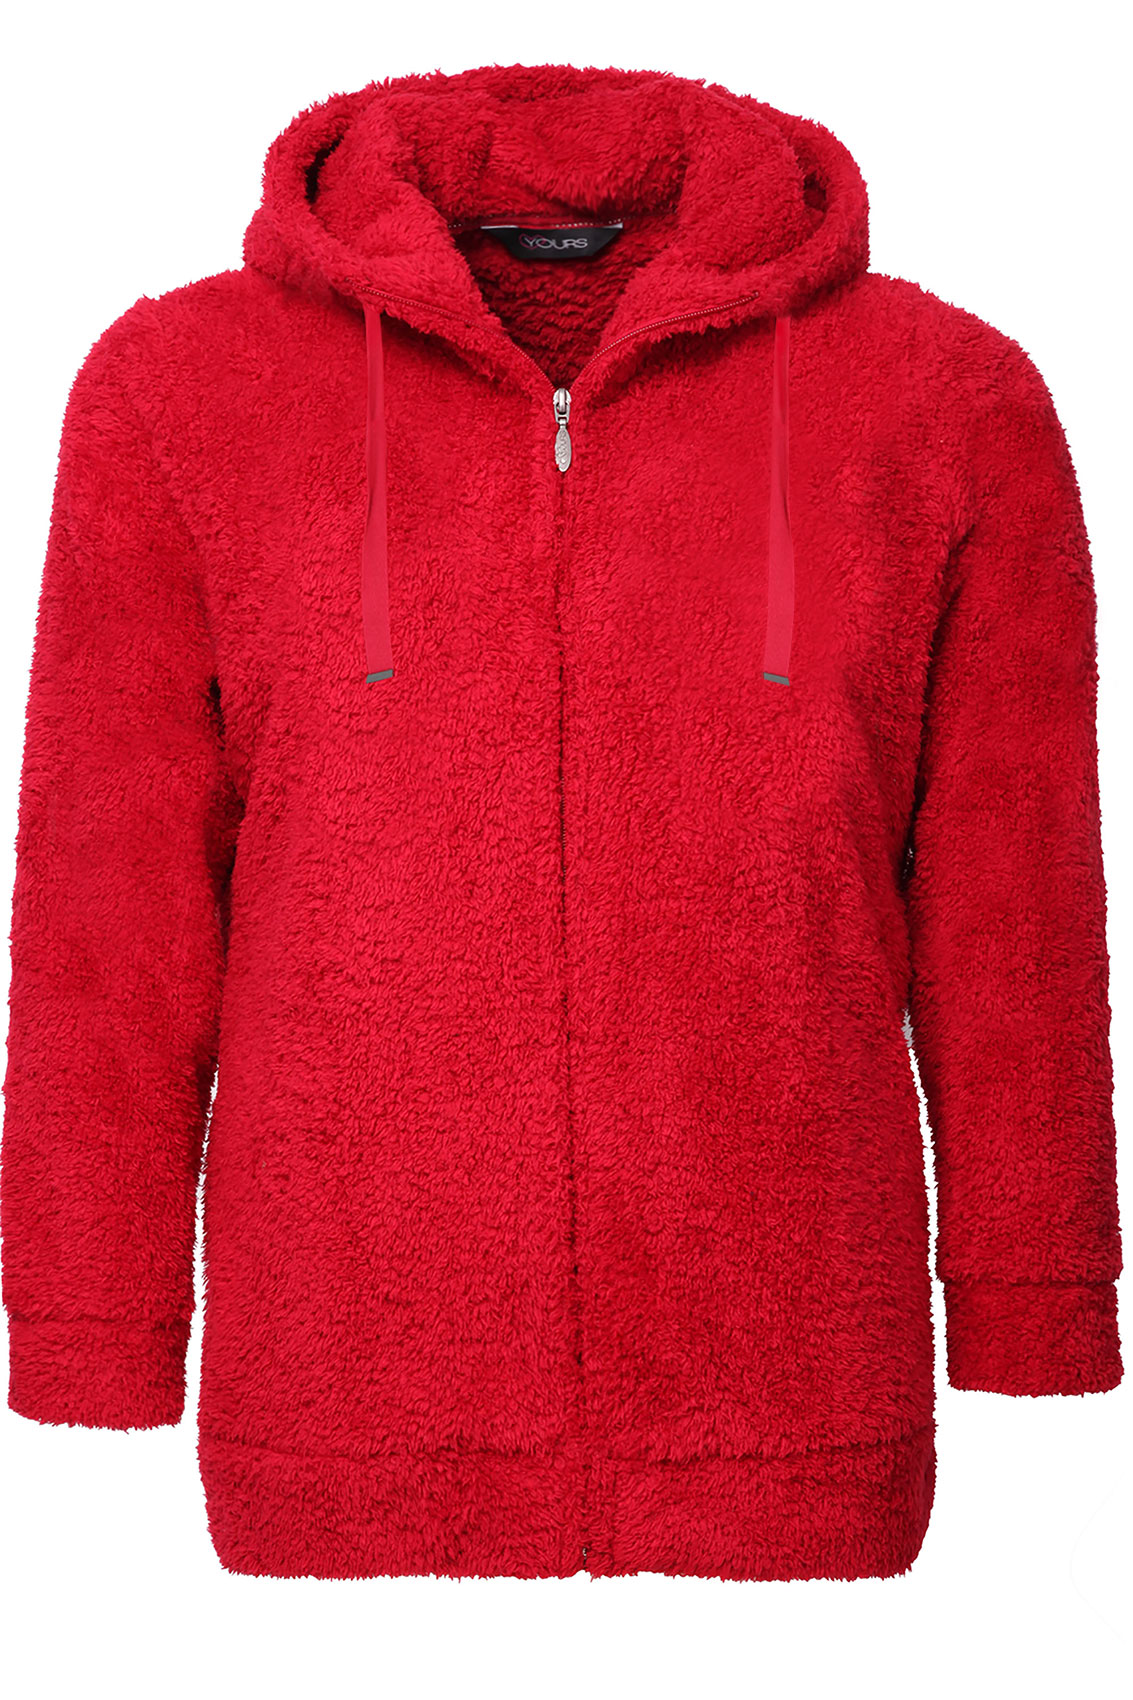 Red Fluffy Fleece Hoodie With Zip Fastening And Drawcord Plus Sizes: 16